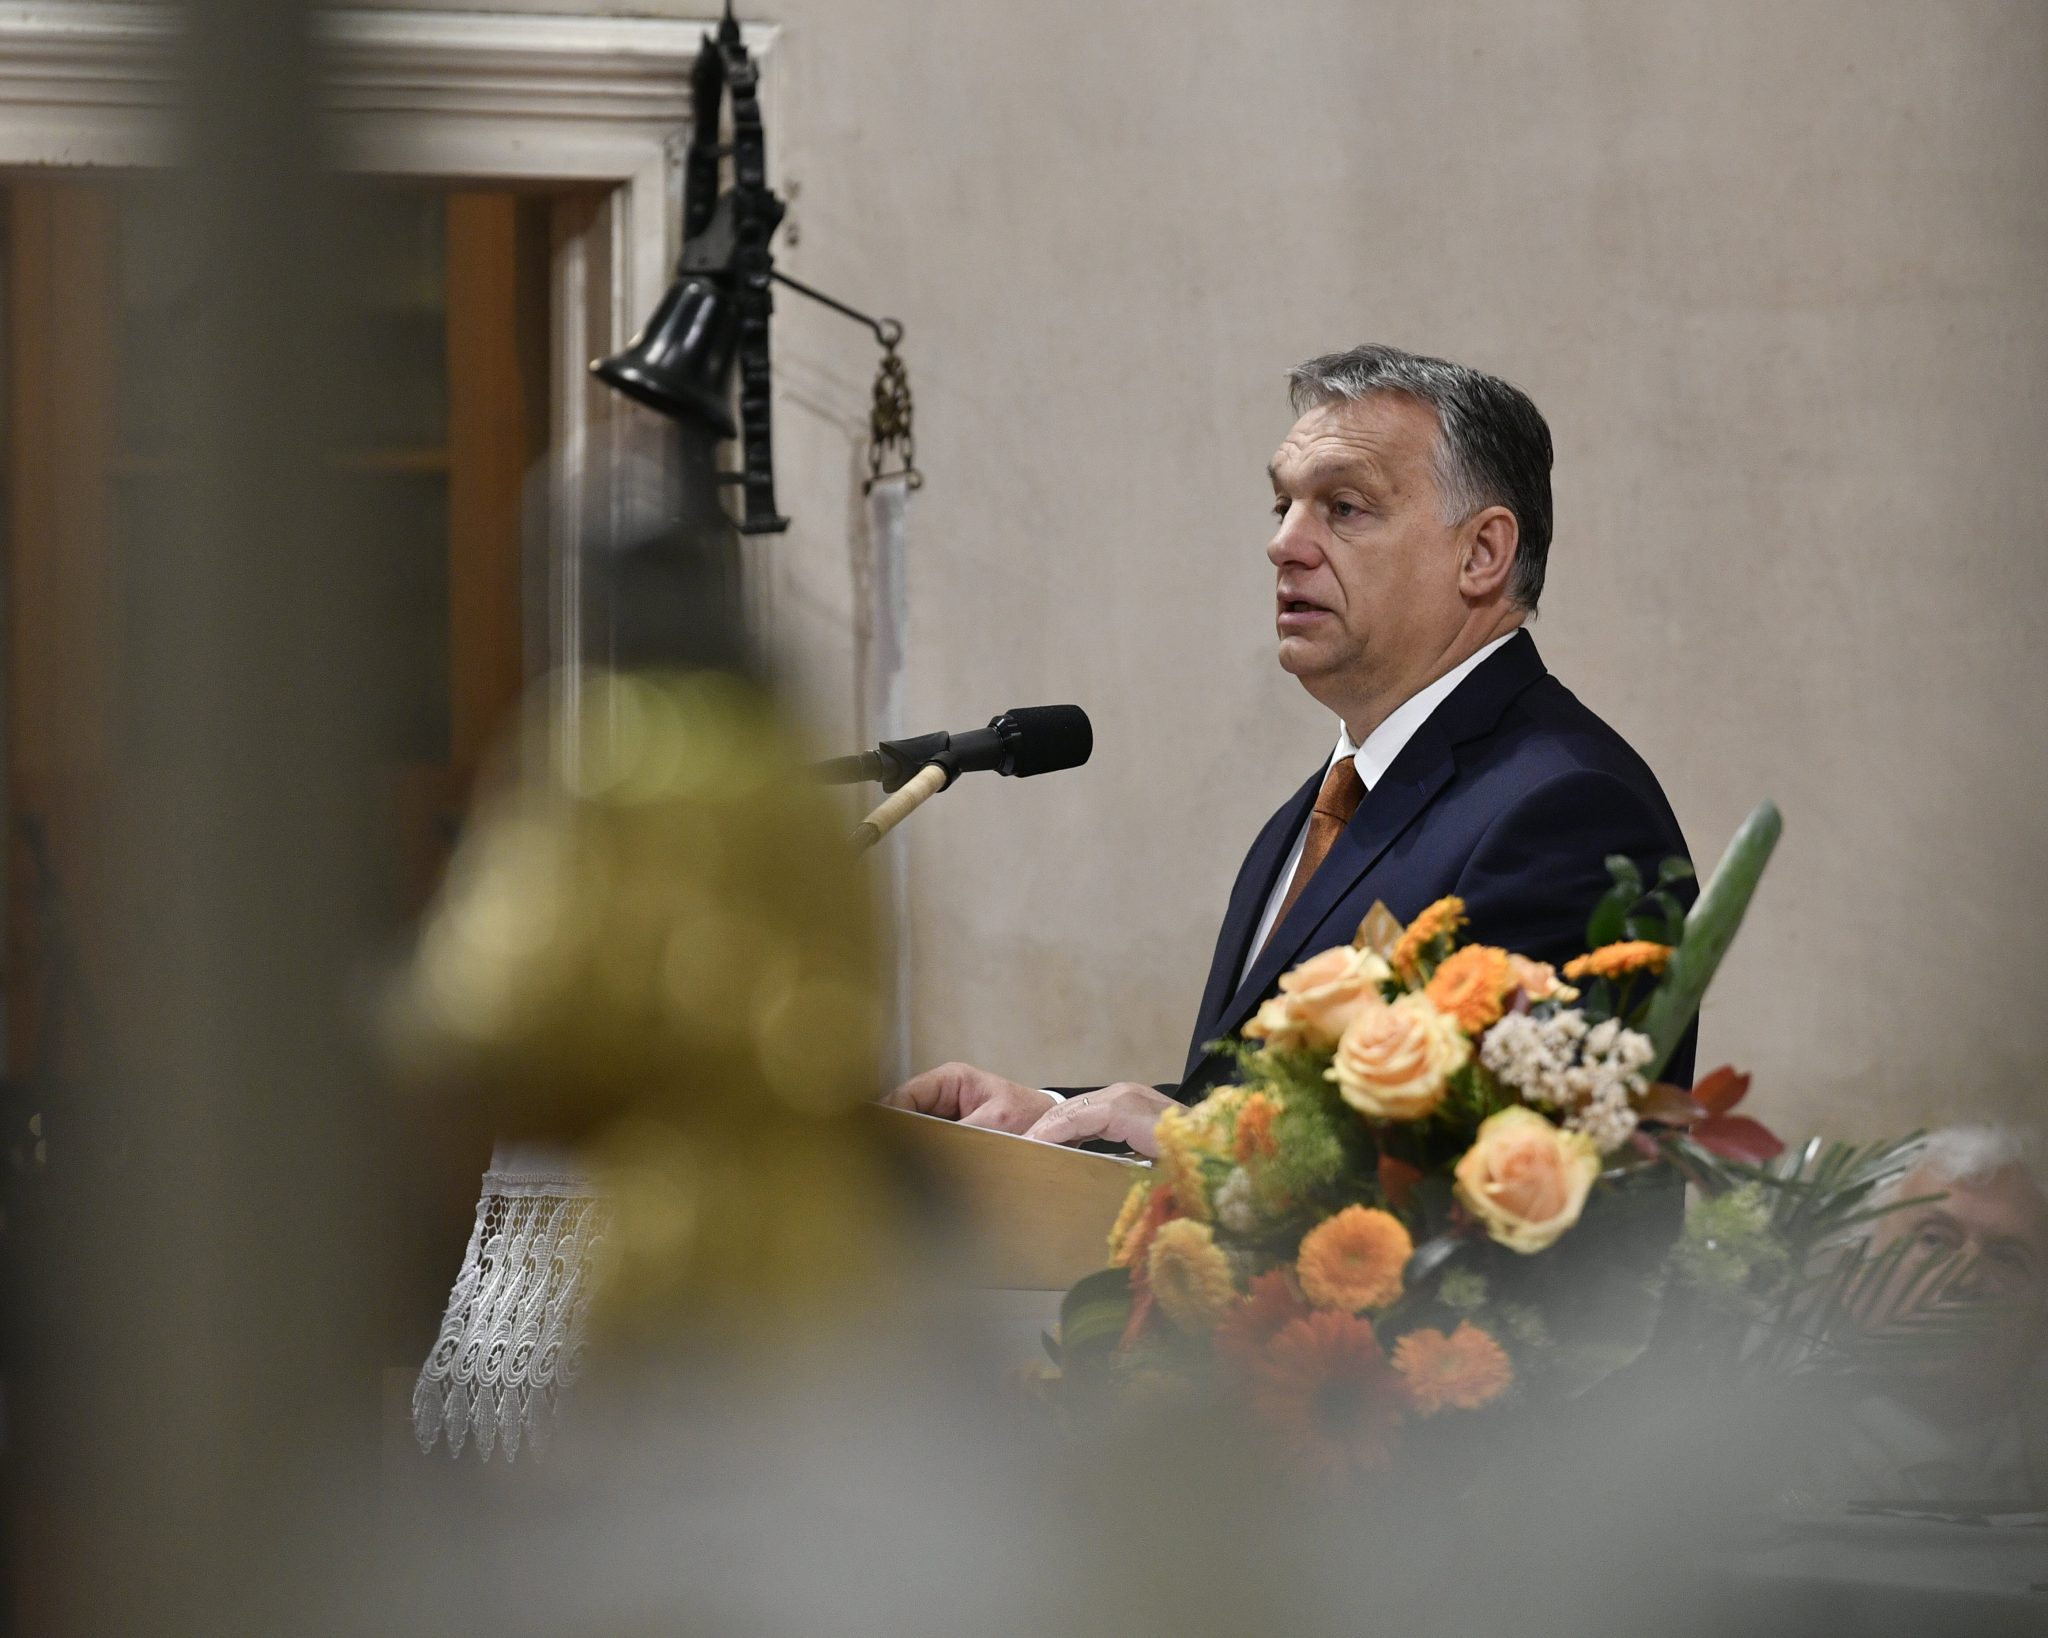 The American Conservative: Orbán Wants to Avoid Problems of the West